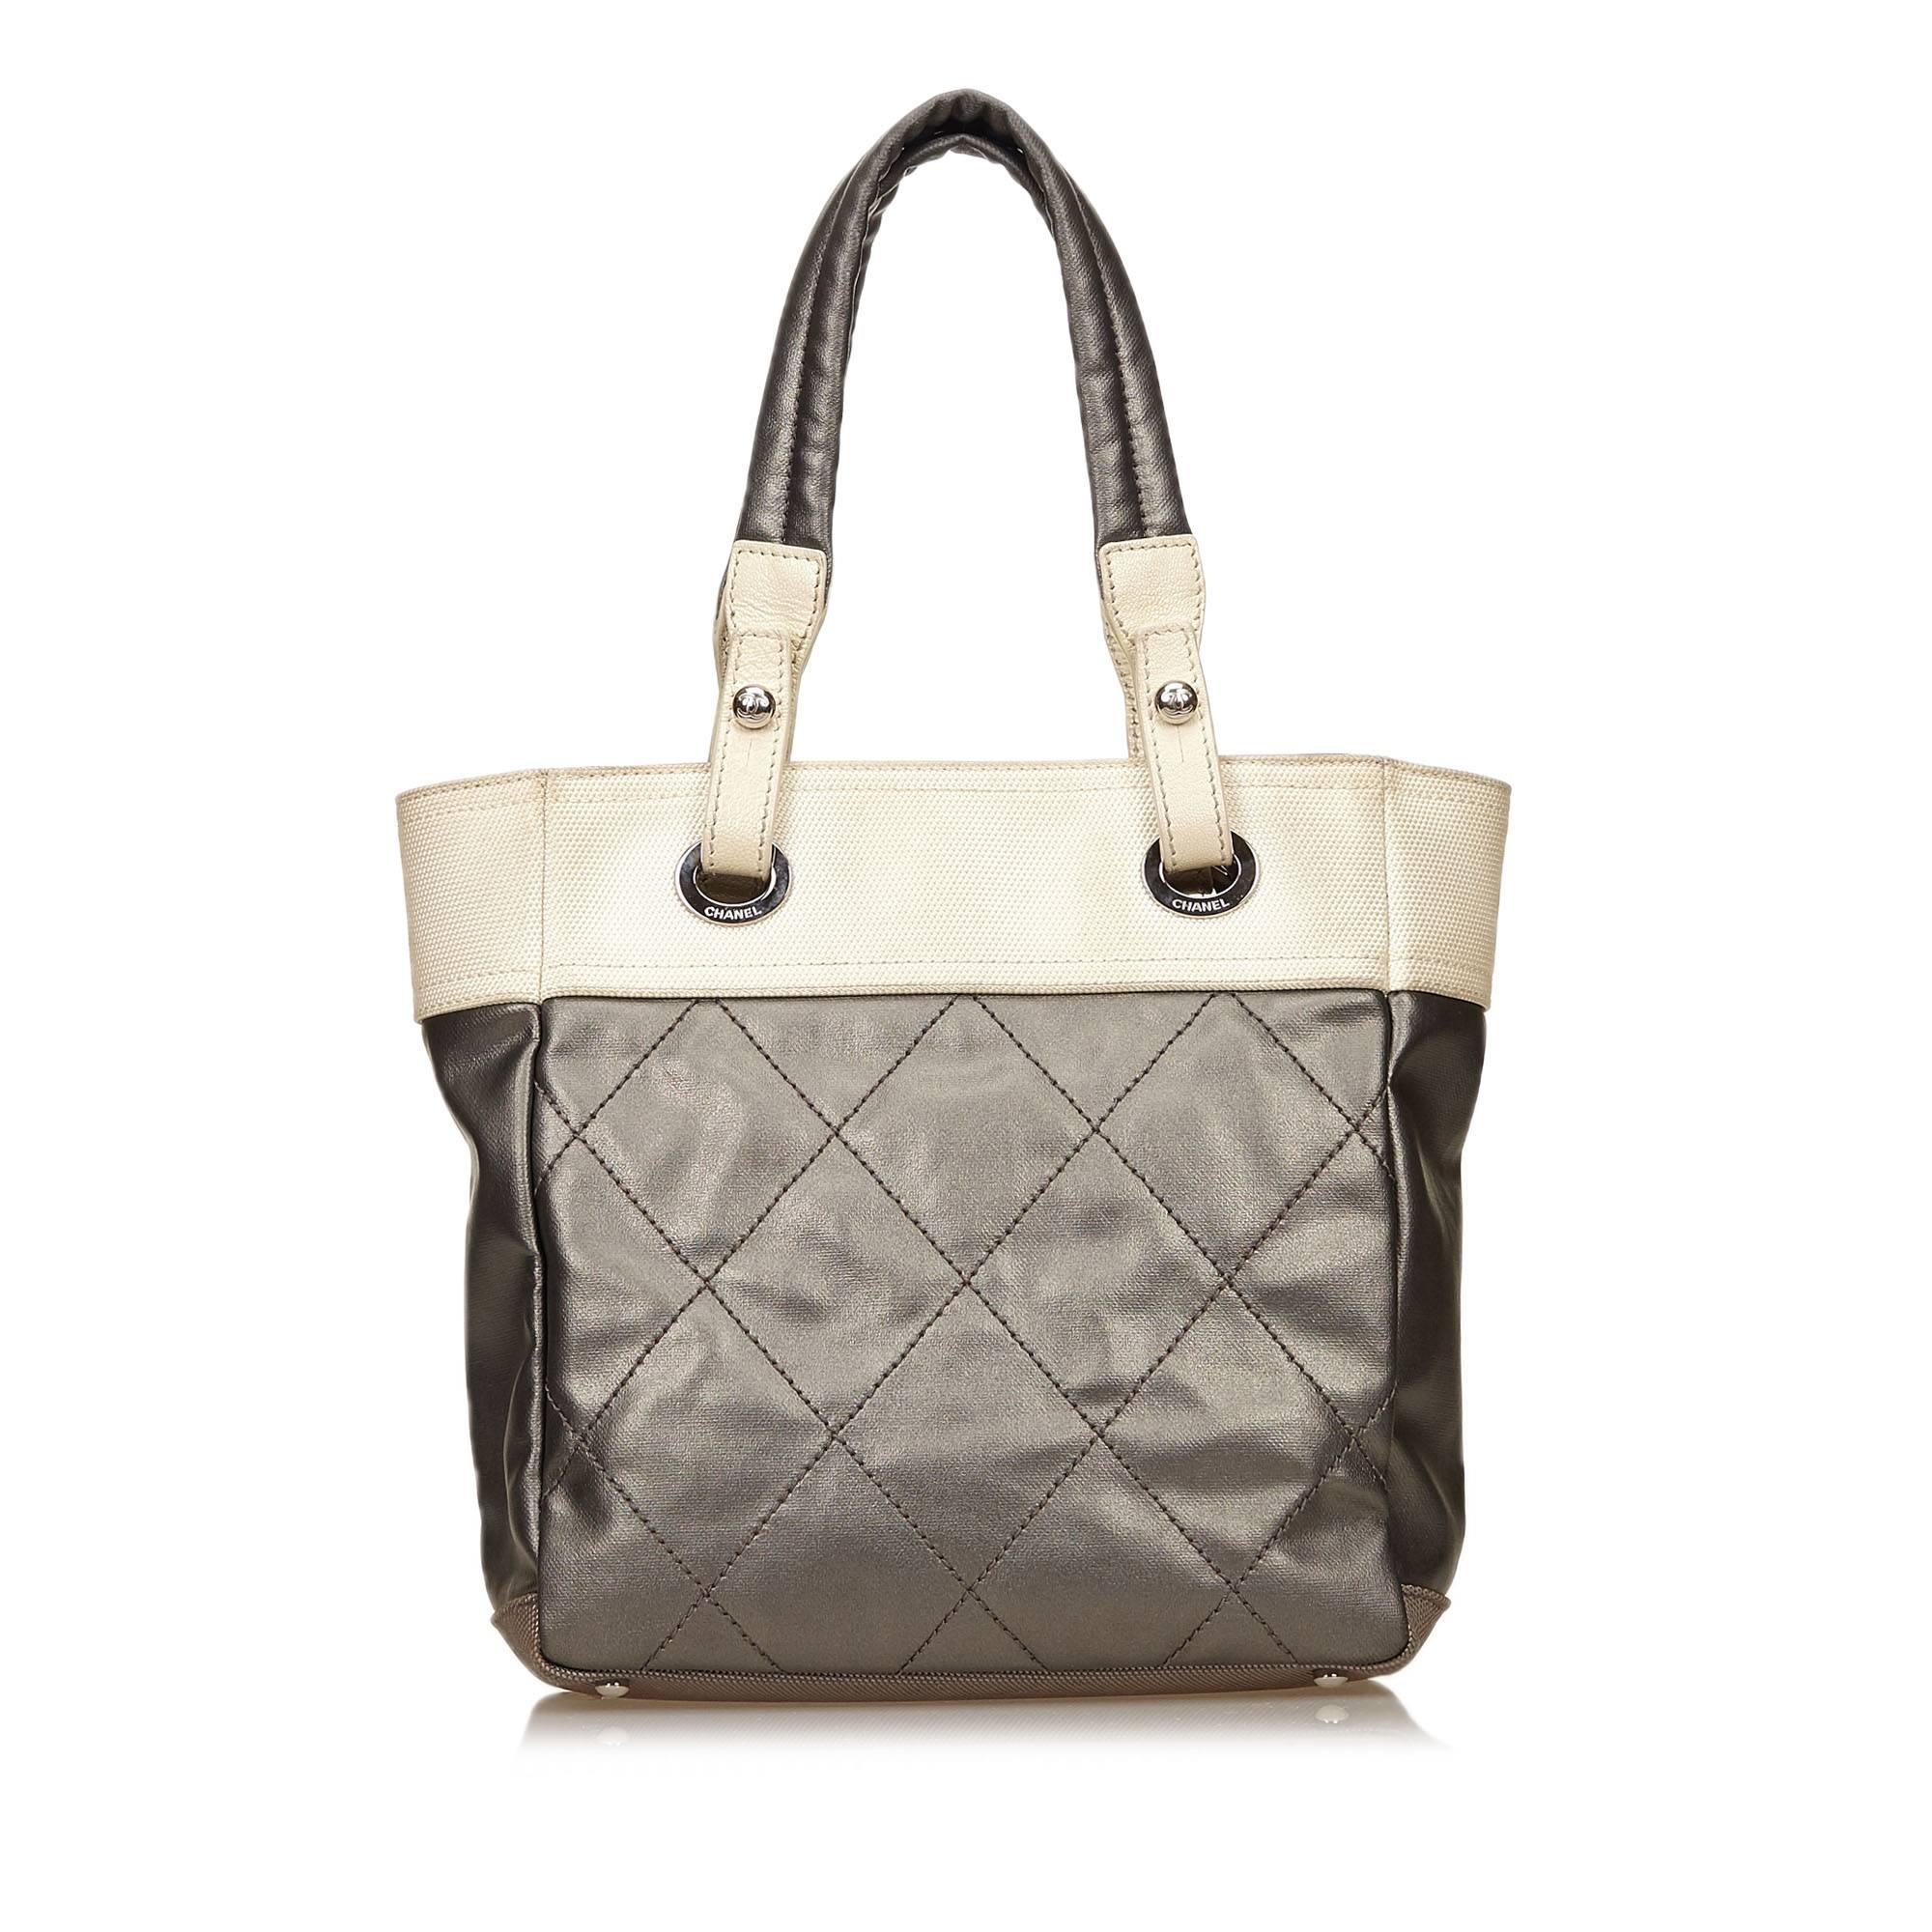 Product details:  Grey and ivory quilted coated canvas and fabric Paris Biarritz tote bag by Chanel.  Dual shoulder straps.  Top zip closure.  Lined interior with inner zip and open pockets with attached key fob.  Protective metal feet.  Silvertone